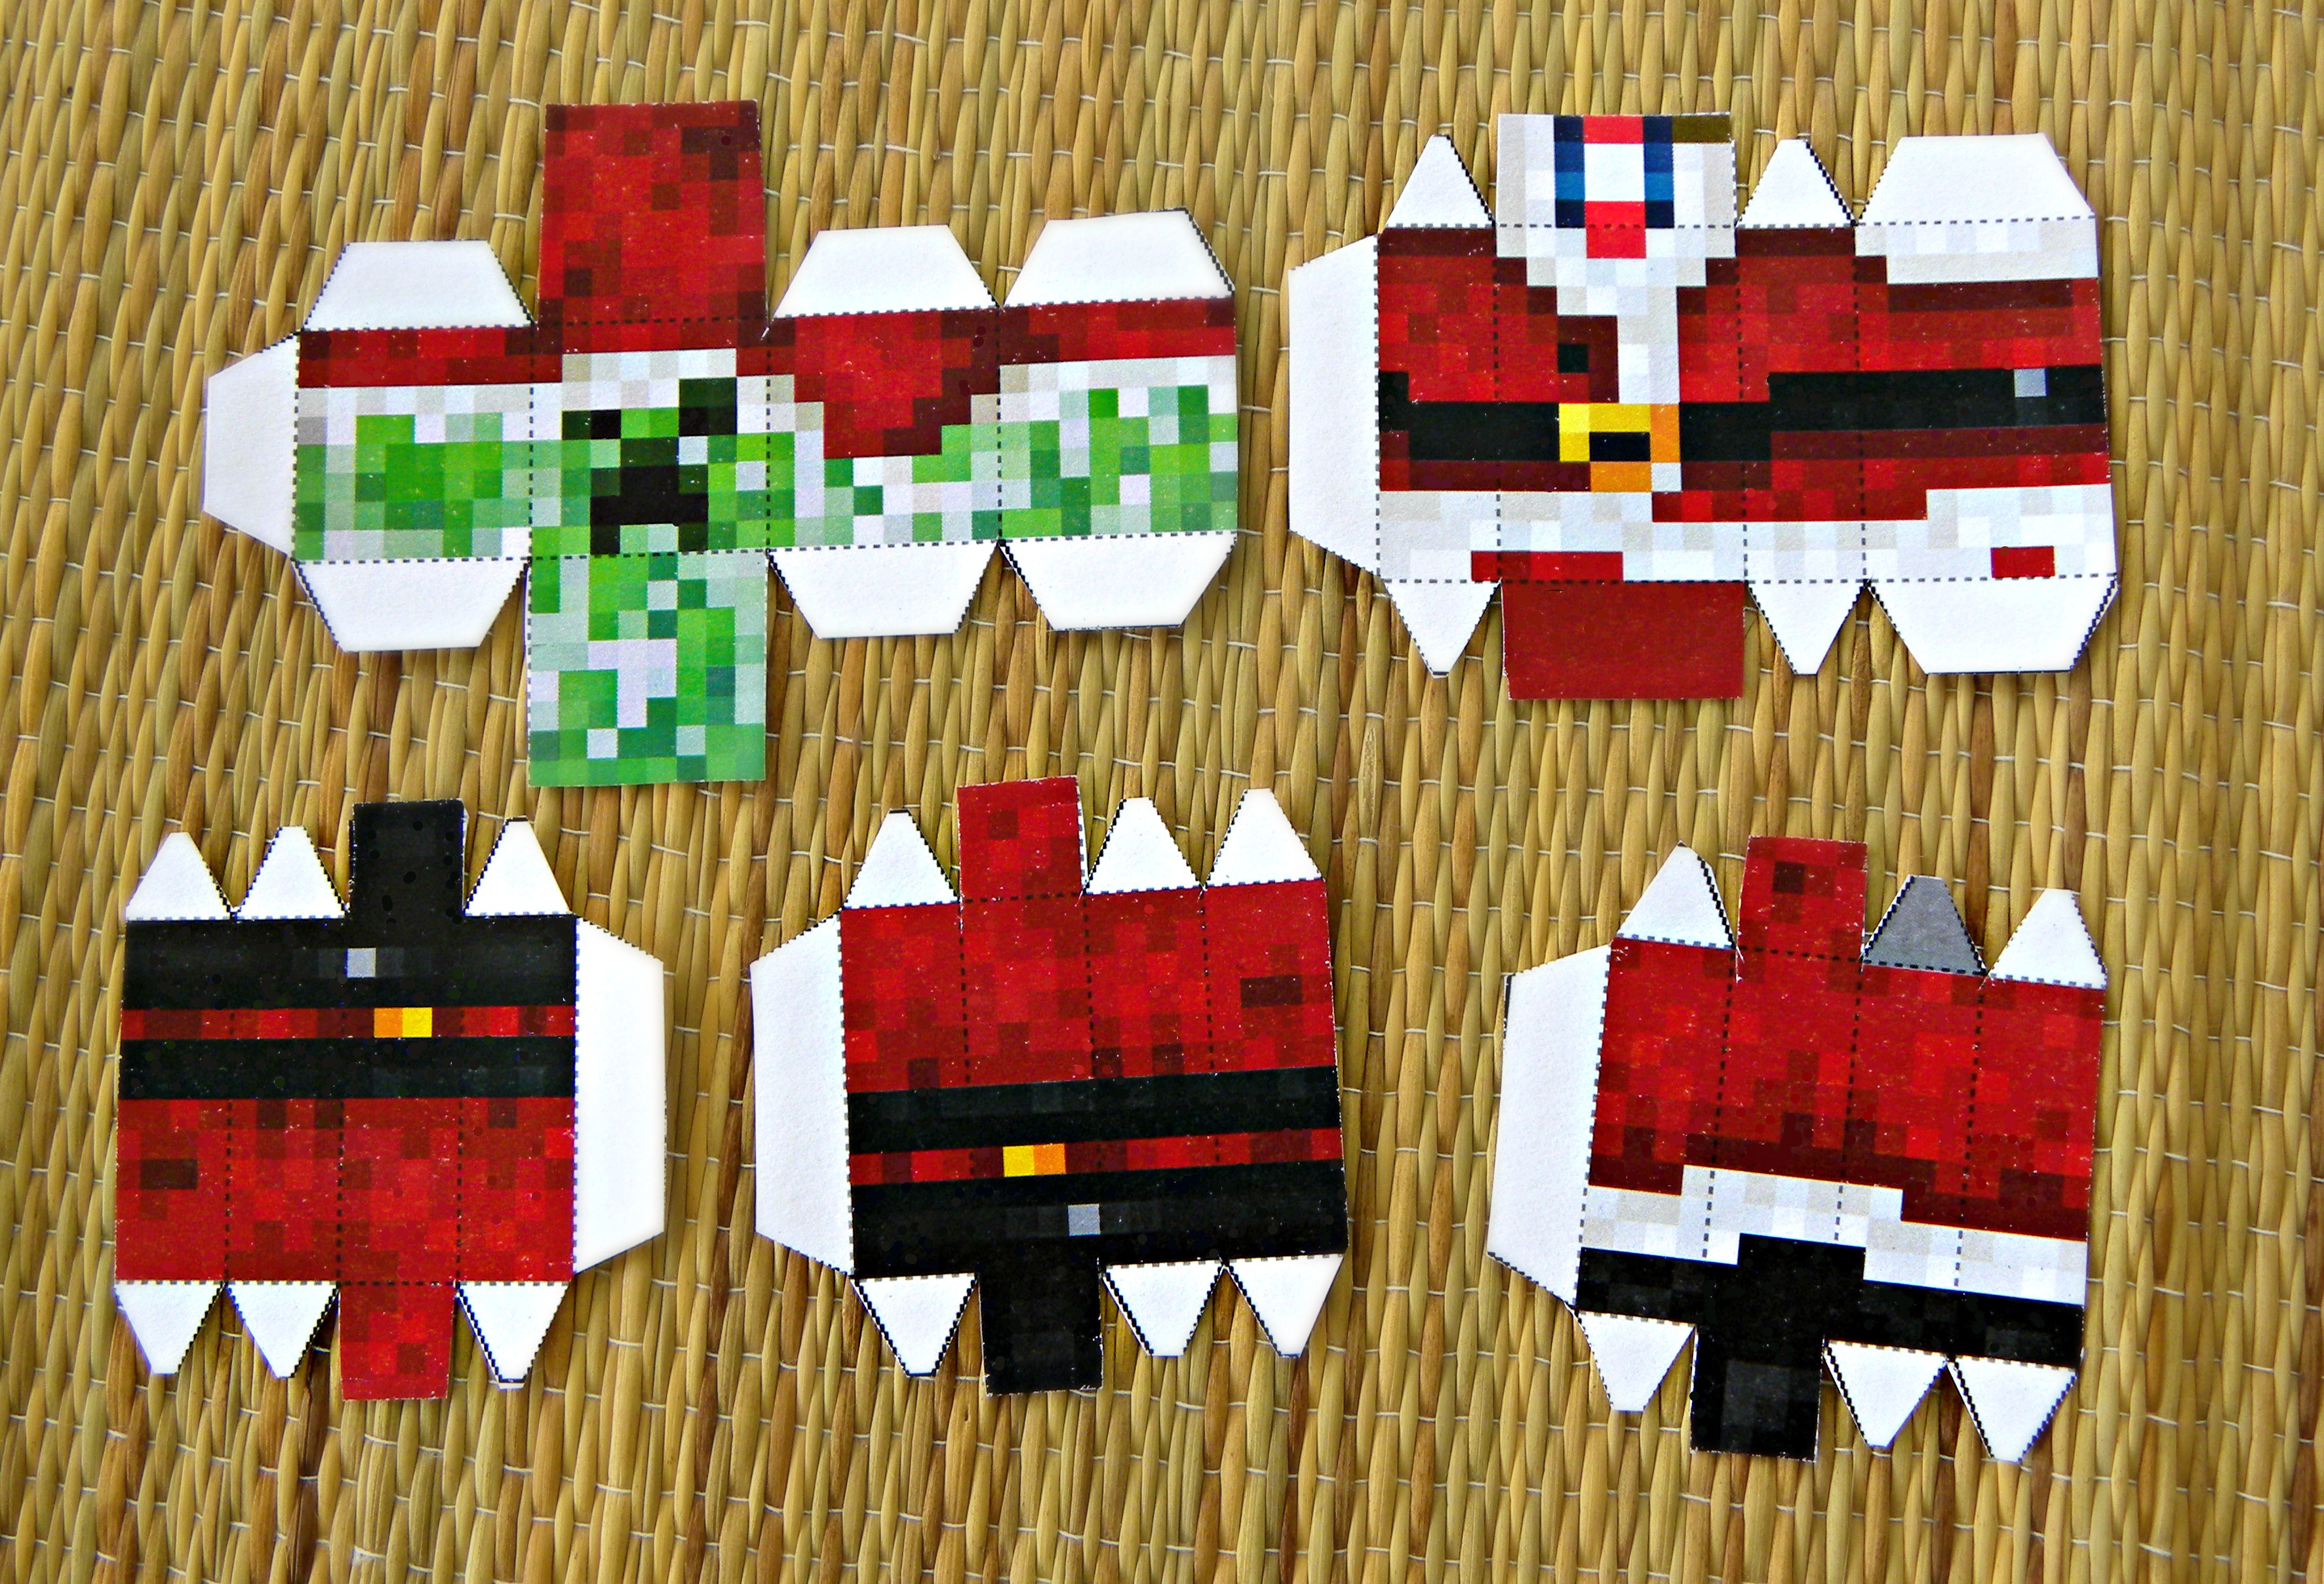 How to Make Your Own Paper Minecraft Character 